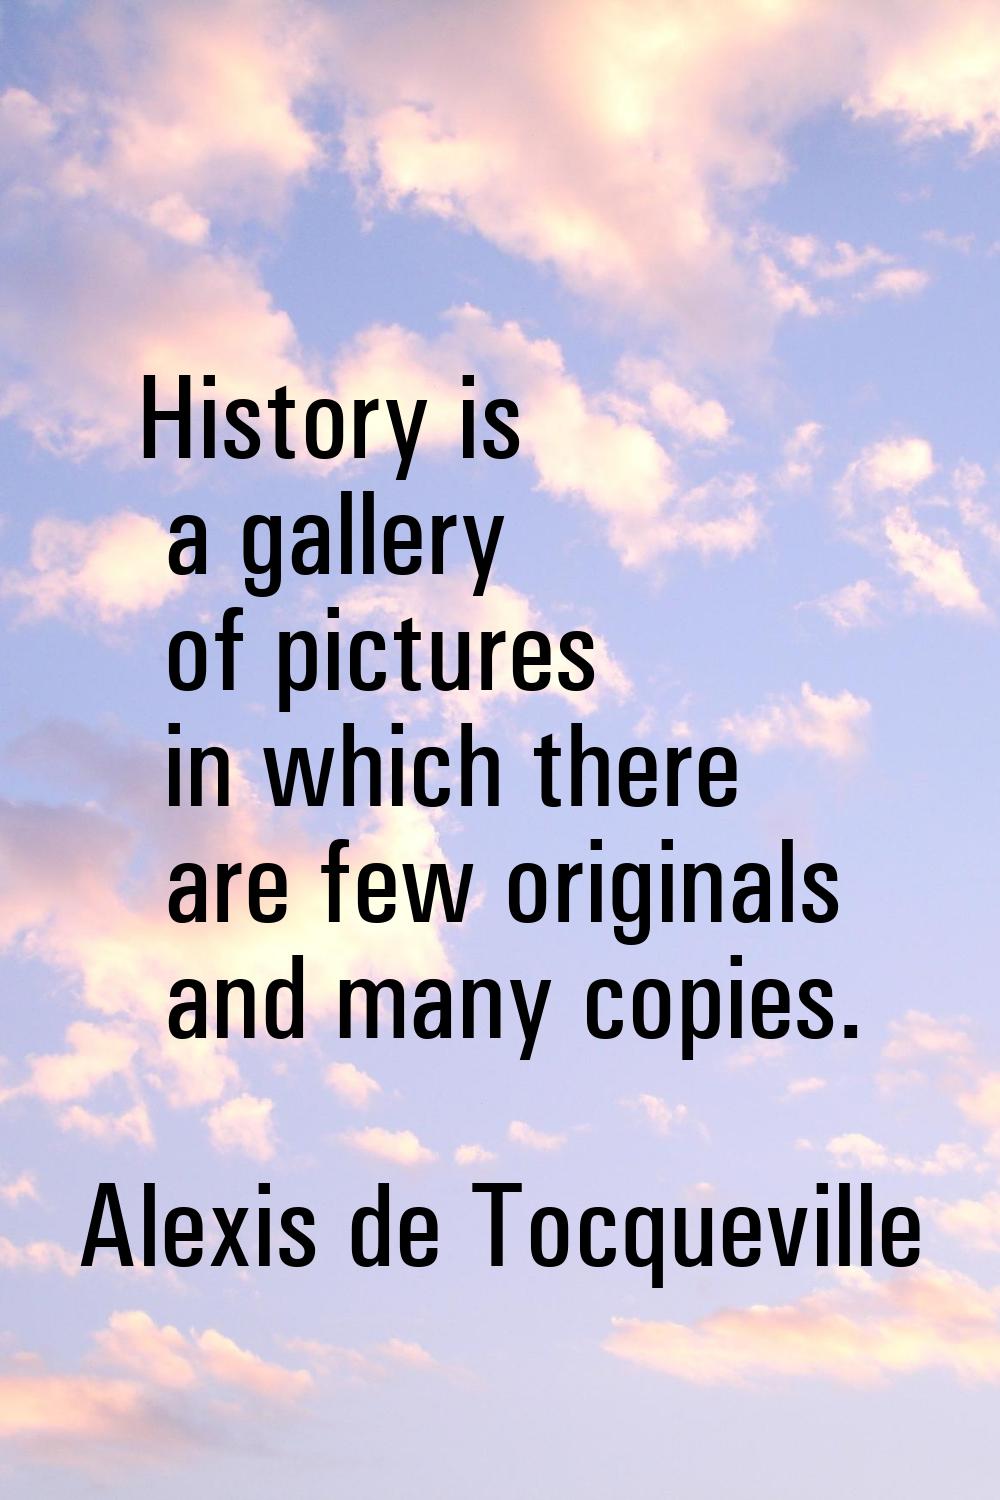 History is a gallery of pictures in which there are few originals and many copies.